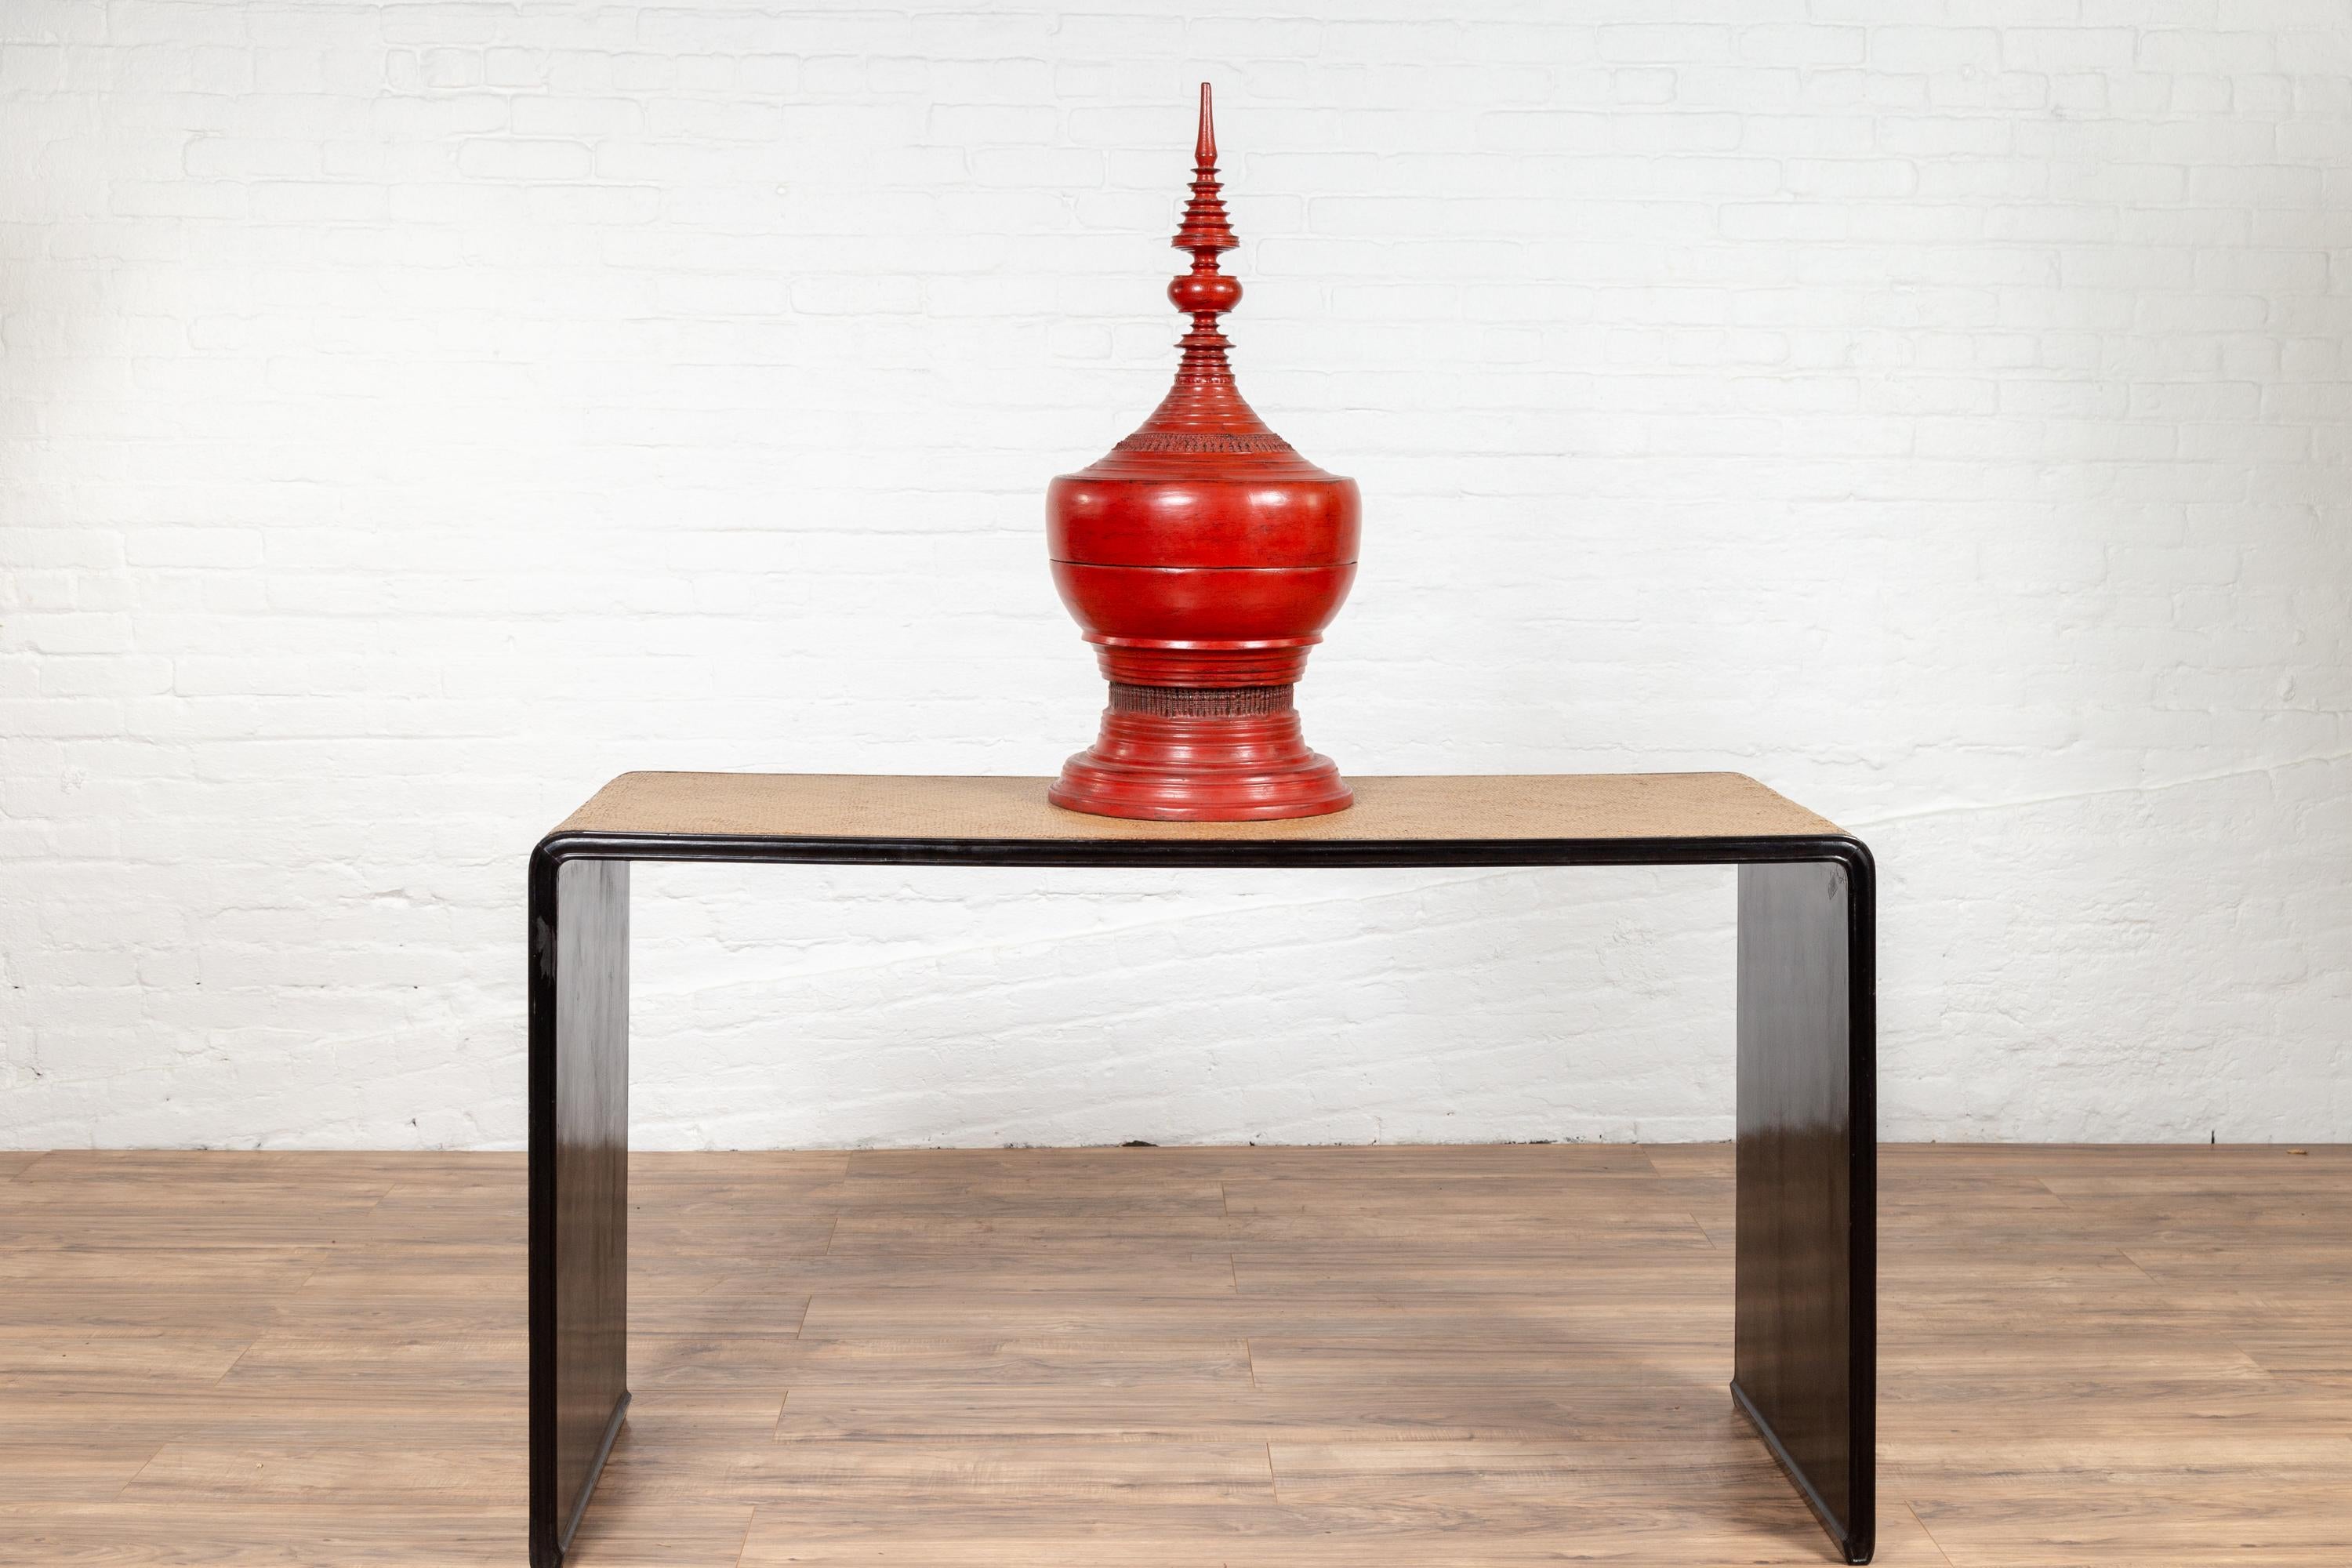 A vintage Burmese waterfall console table from the mid-20th century, with black lacquer frame and rattan top and sides. This simple yet elegant Burmese table features a clean Silhouette, presenting a black lacquered waterfall wooden frame supporting